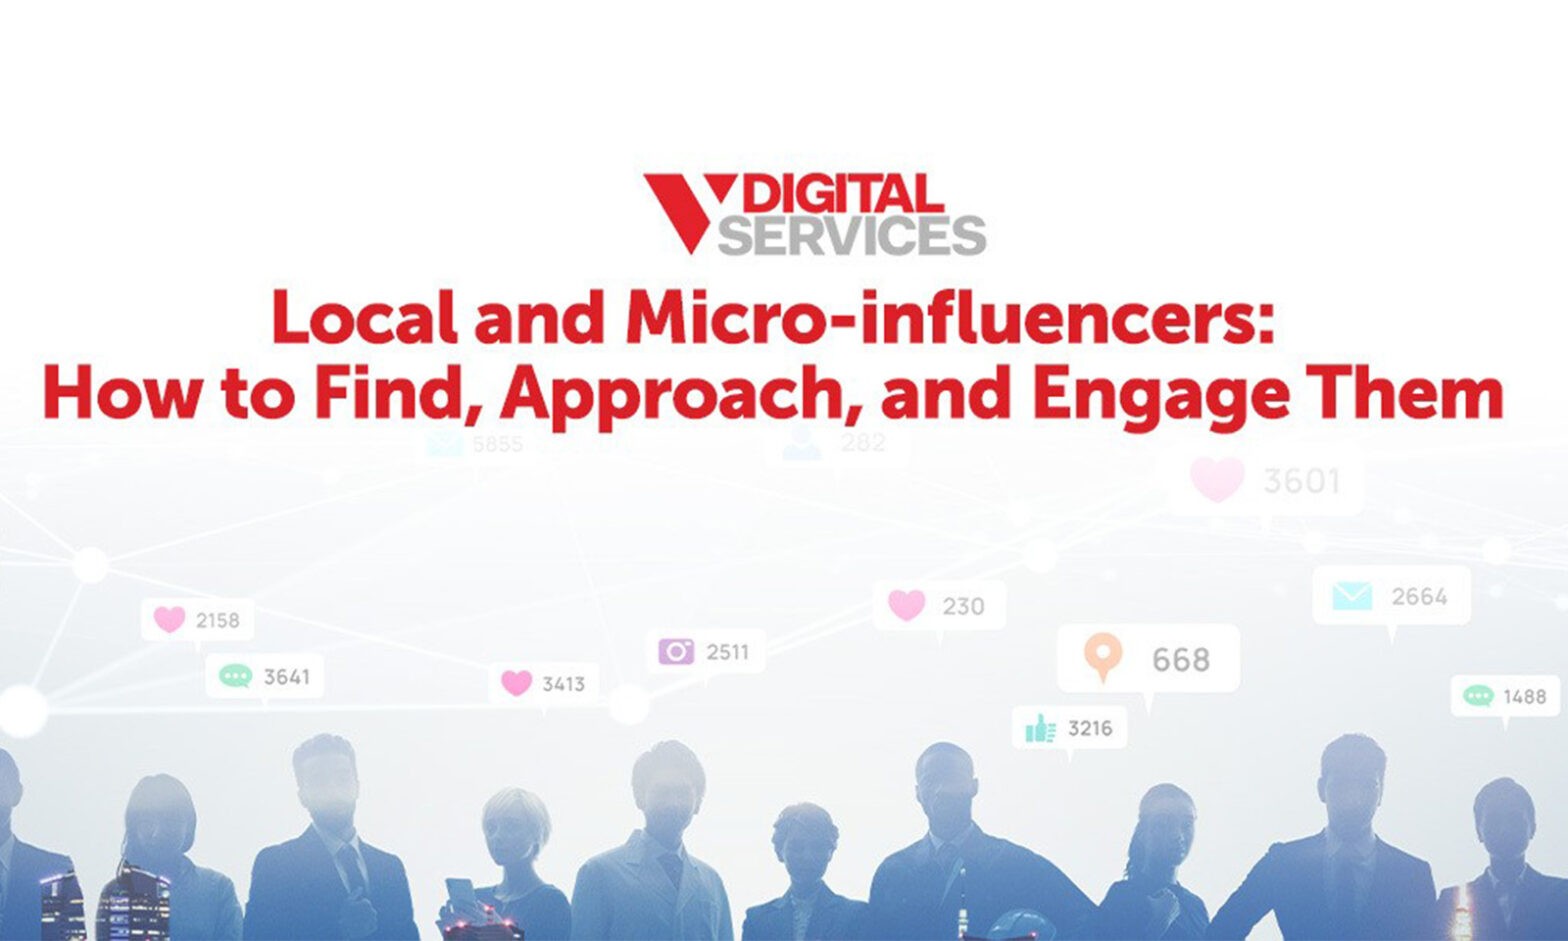 Featured image for post: Engaging with Local and Micro-influencers